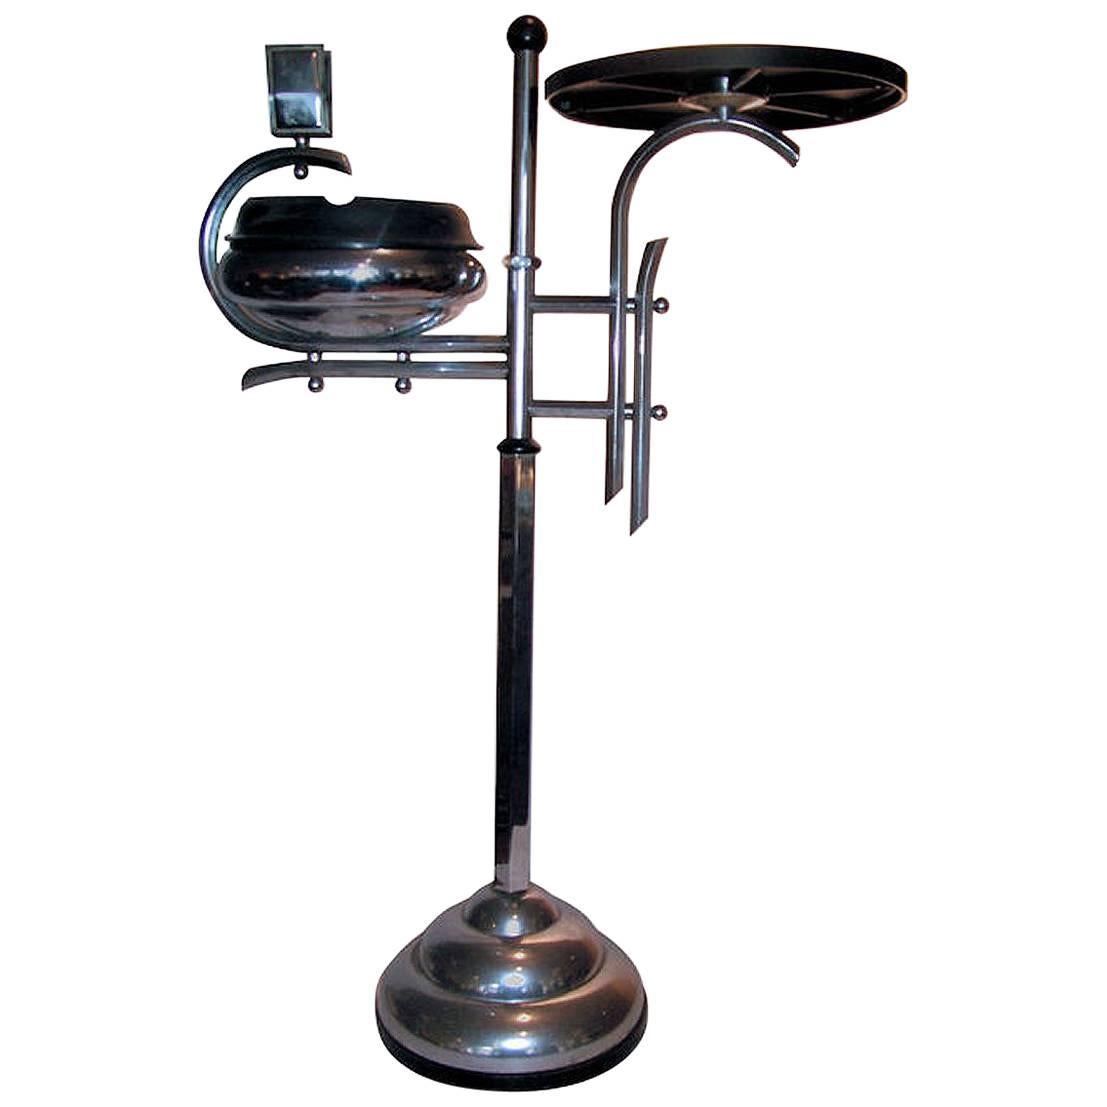 1930s Art Deco Chrome and Bakelite Smokers and Drinks Stand